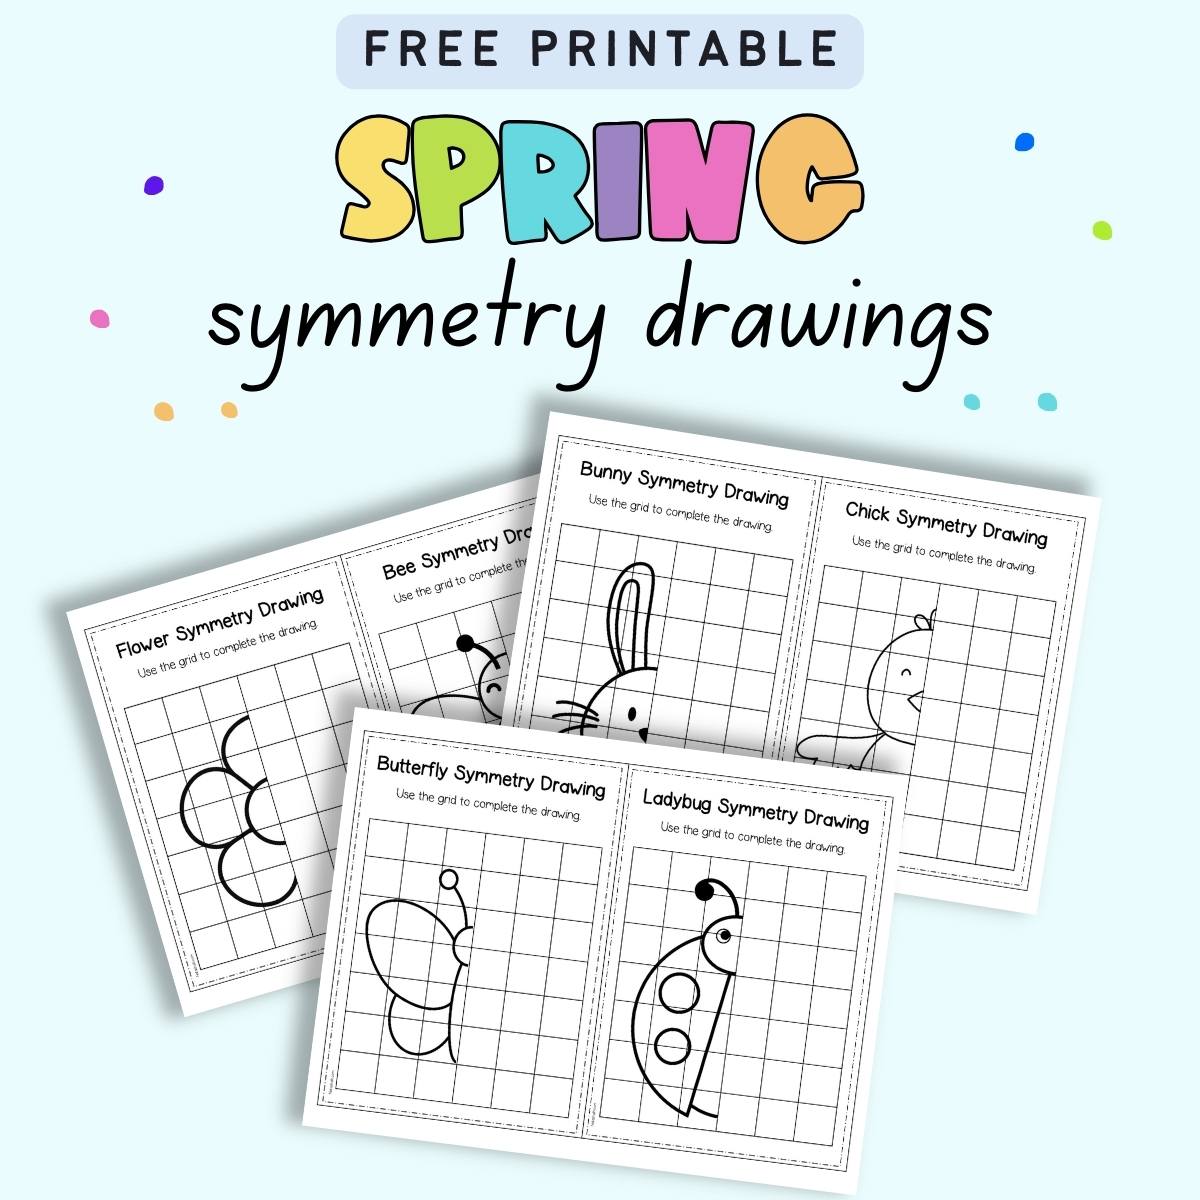 Text "free printable spring symmetry drawings" with a preview of there ages of spring themed symmetry drawings for early learners.